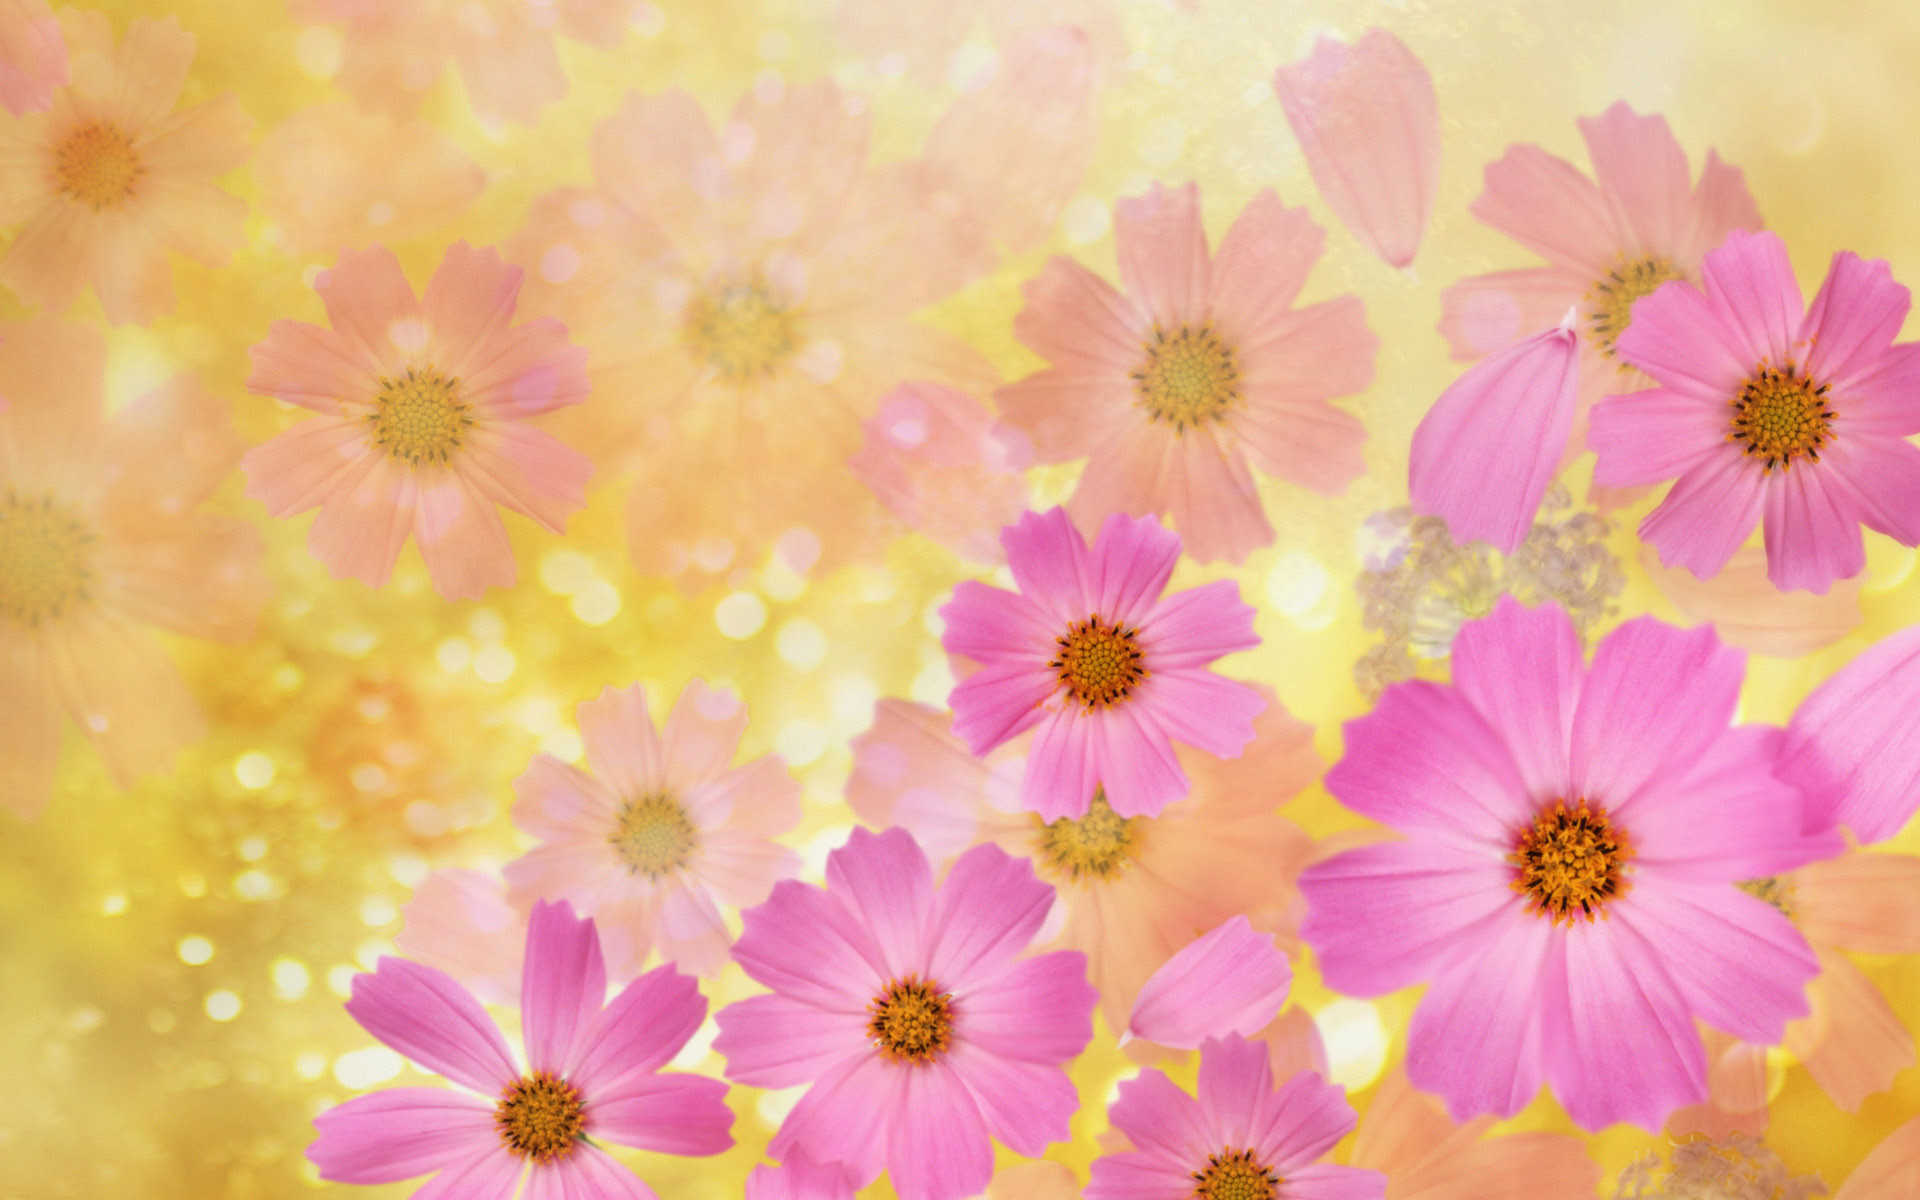 Lovely Pink Sakura Themes Live Wallpapers Apk Download for Android- Latest  version 10.2- com.launcher.wallpapers.free.layout.emoji.color.phone.themes. lovely.pink.sakura